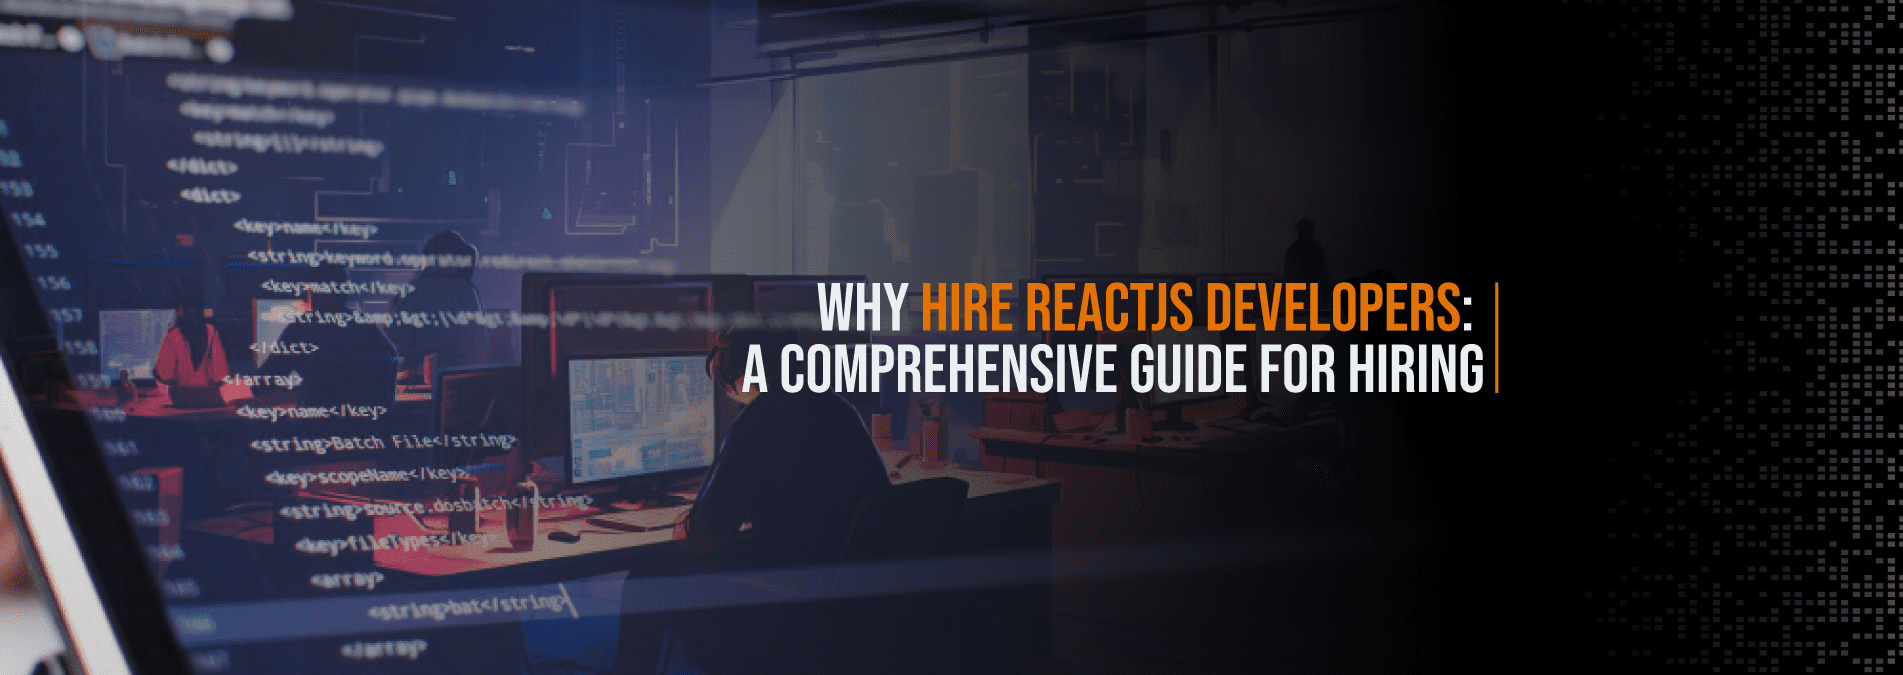 Why-Hire-ReactJs-Developers-A-Comprehensive-Guide-for-Hiring- Internet Soft